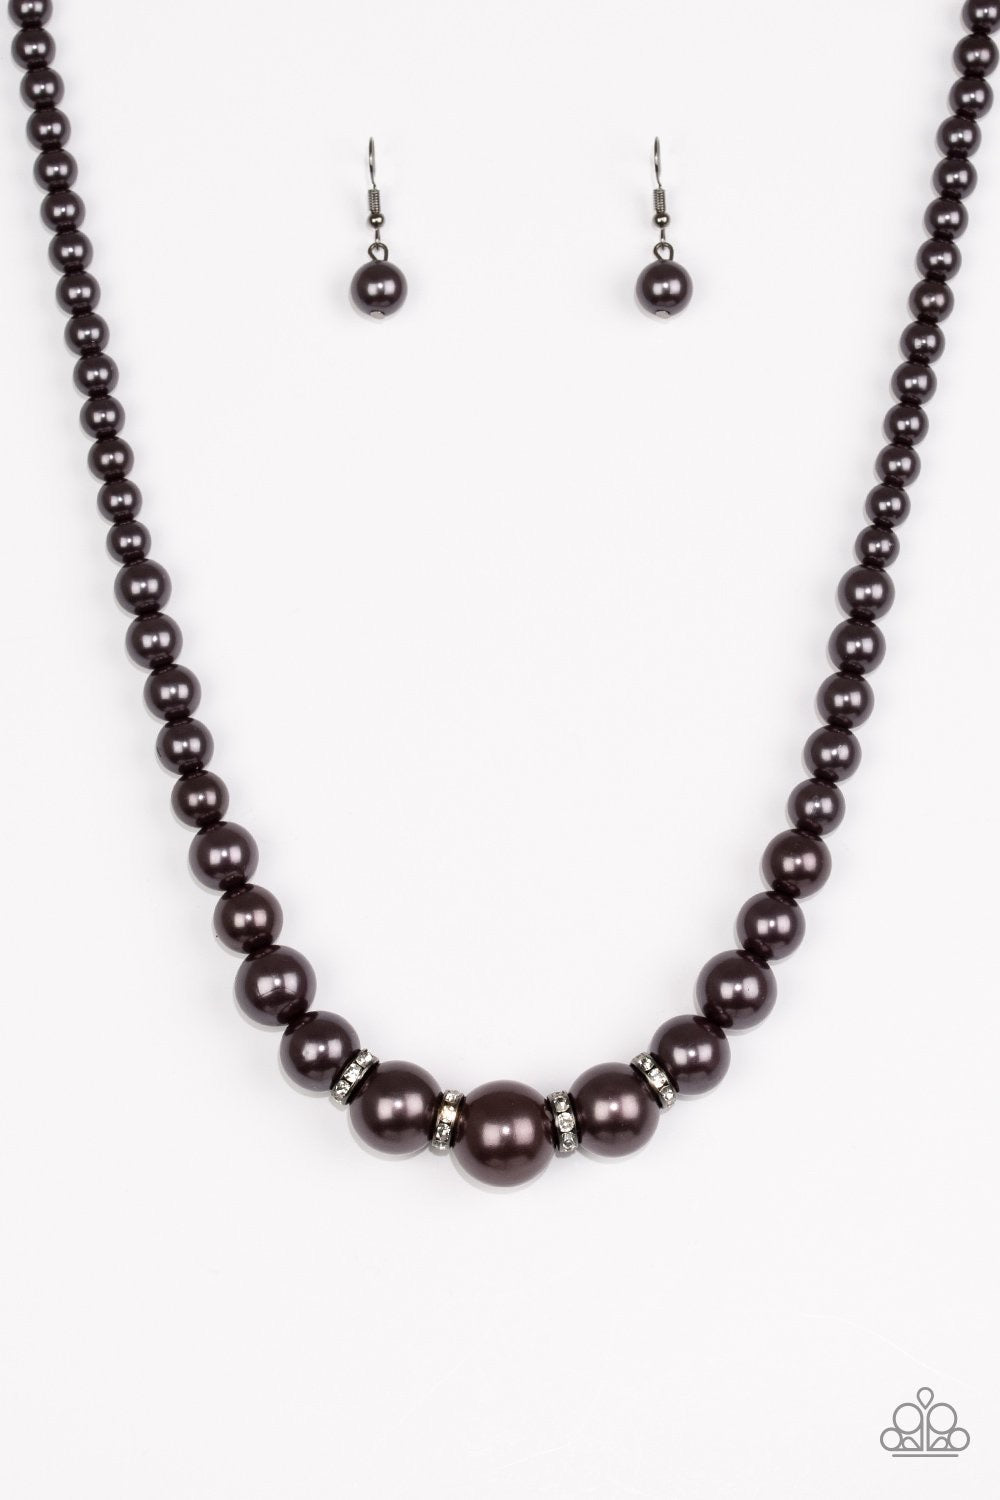 Paparazzi Accessories  - Party Pearls #N219 Box 3 - Black Necklace